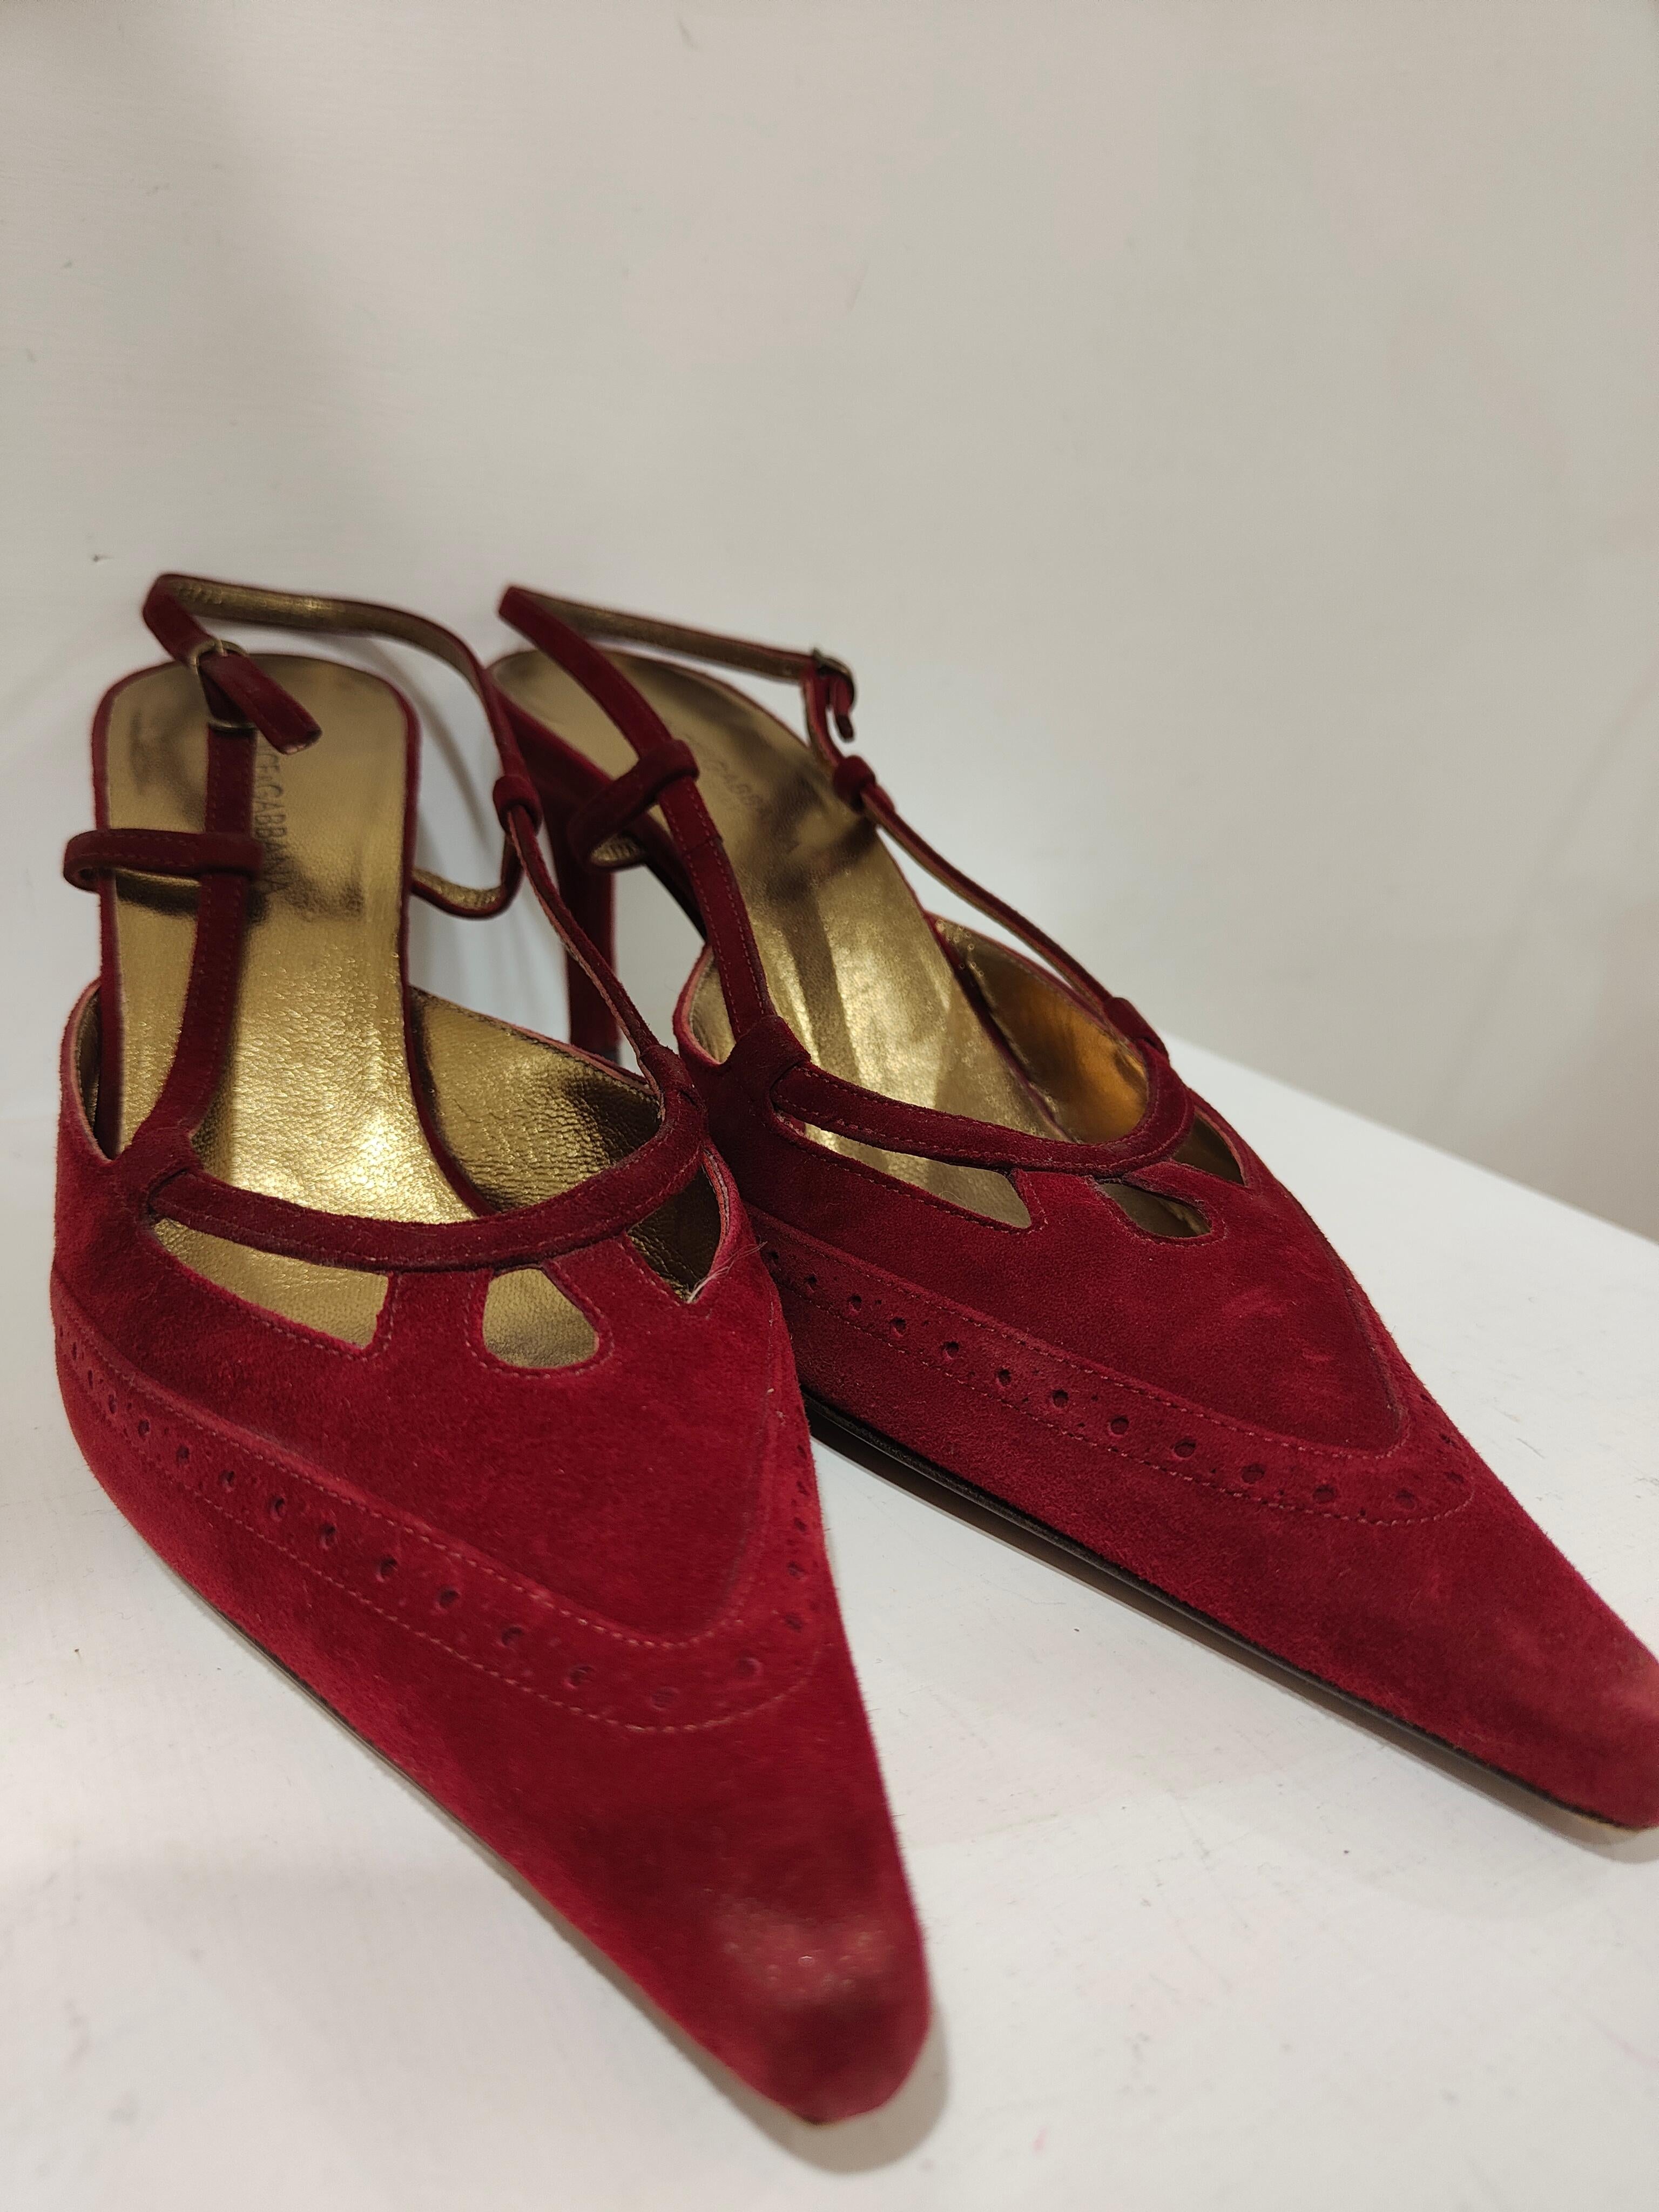 Dolce & Gabbana bordeaux suede sandals shoes In Good Condition For Sale In Capri, IT